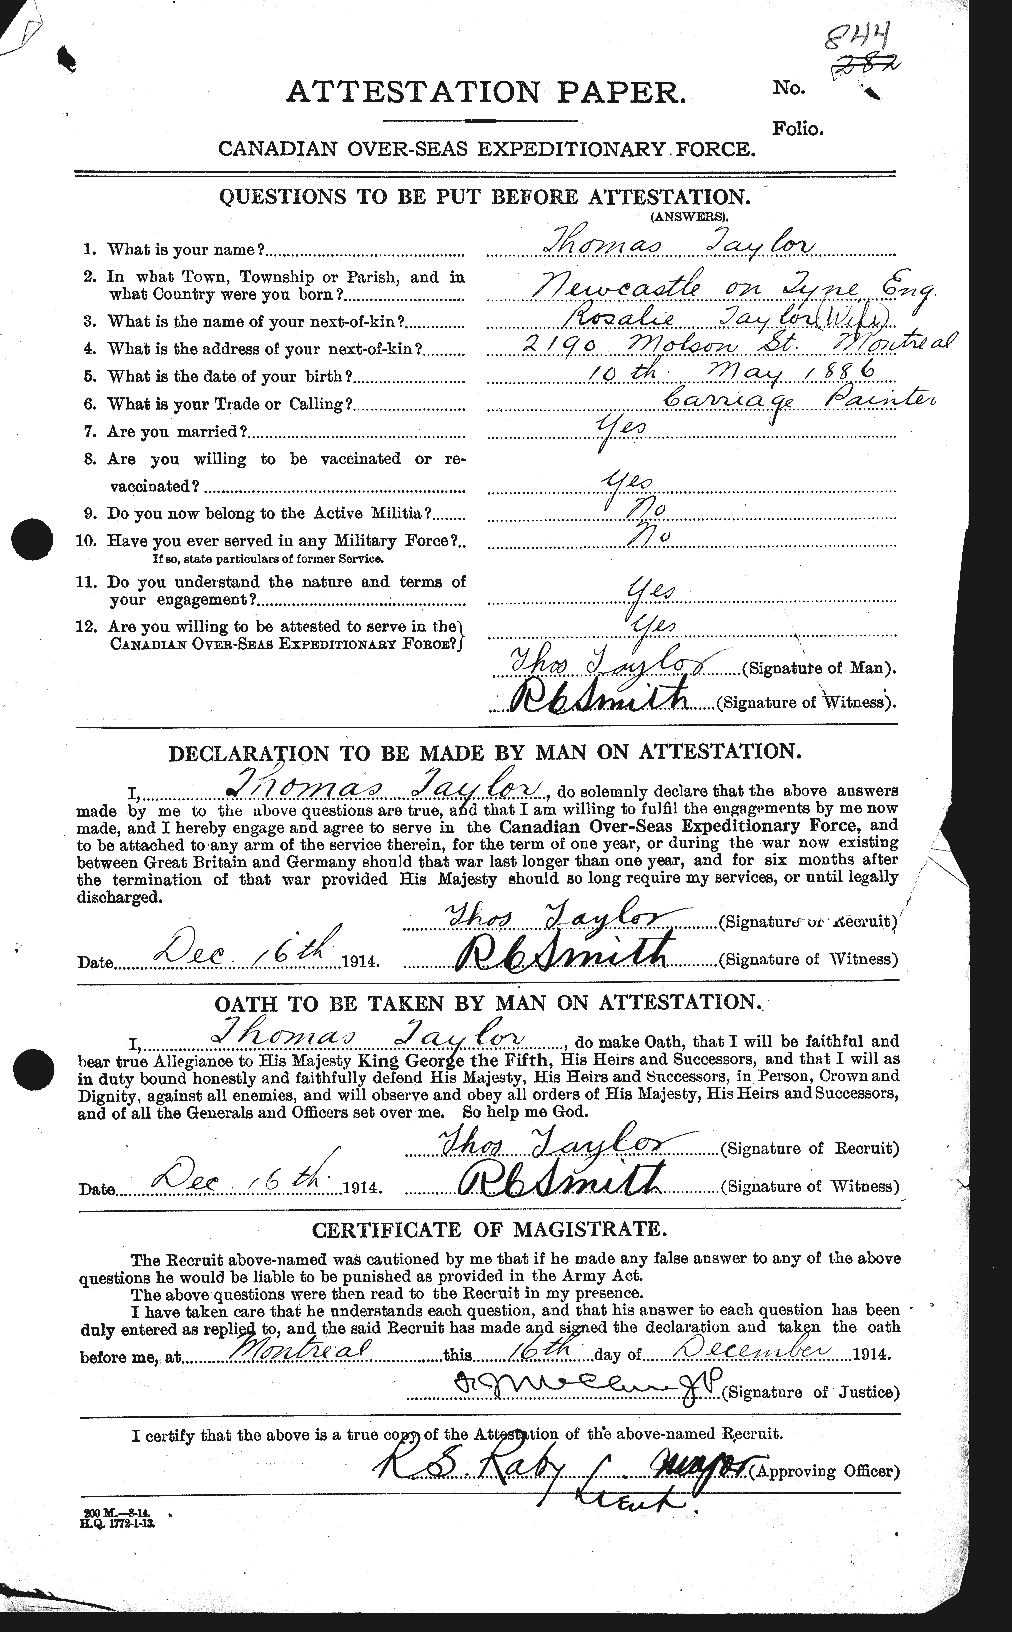 Personnel Records of the First World War - CEF 627960a